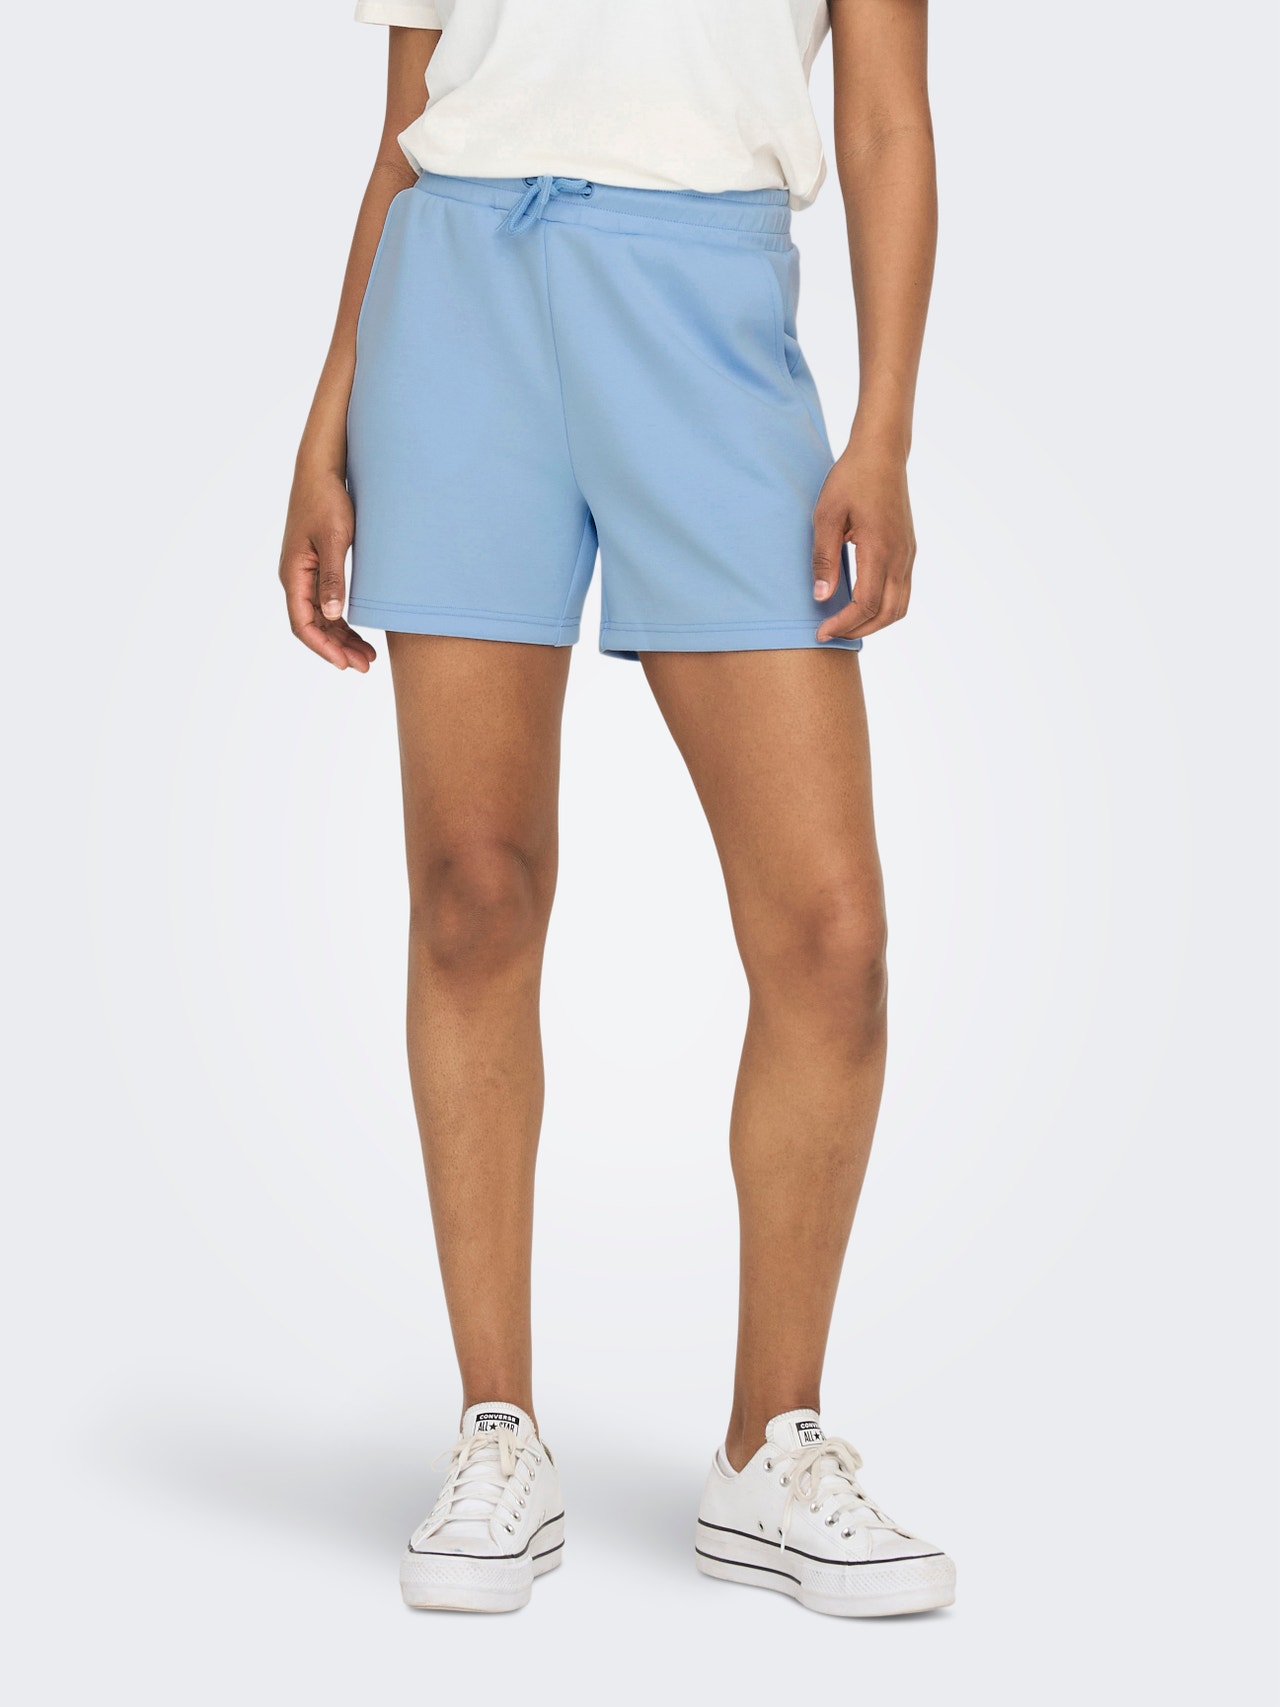 ONLY Solid colored training Sweat shorts -Chambray Blue - 15245851